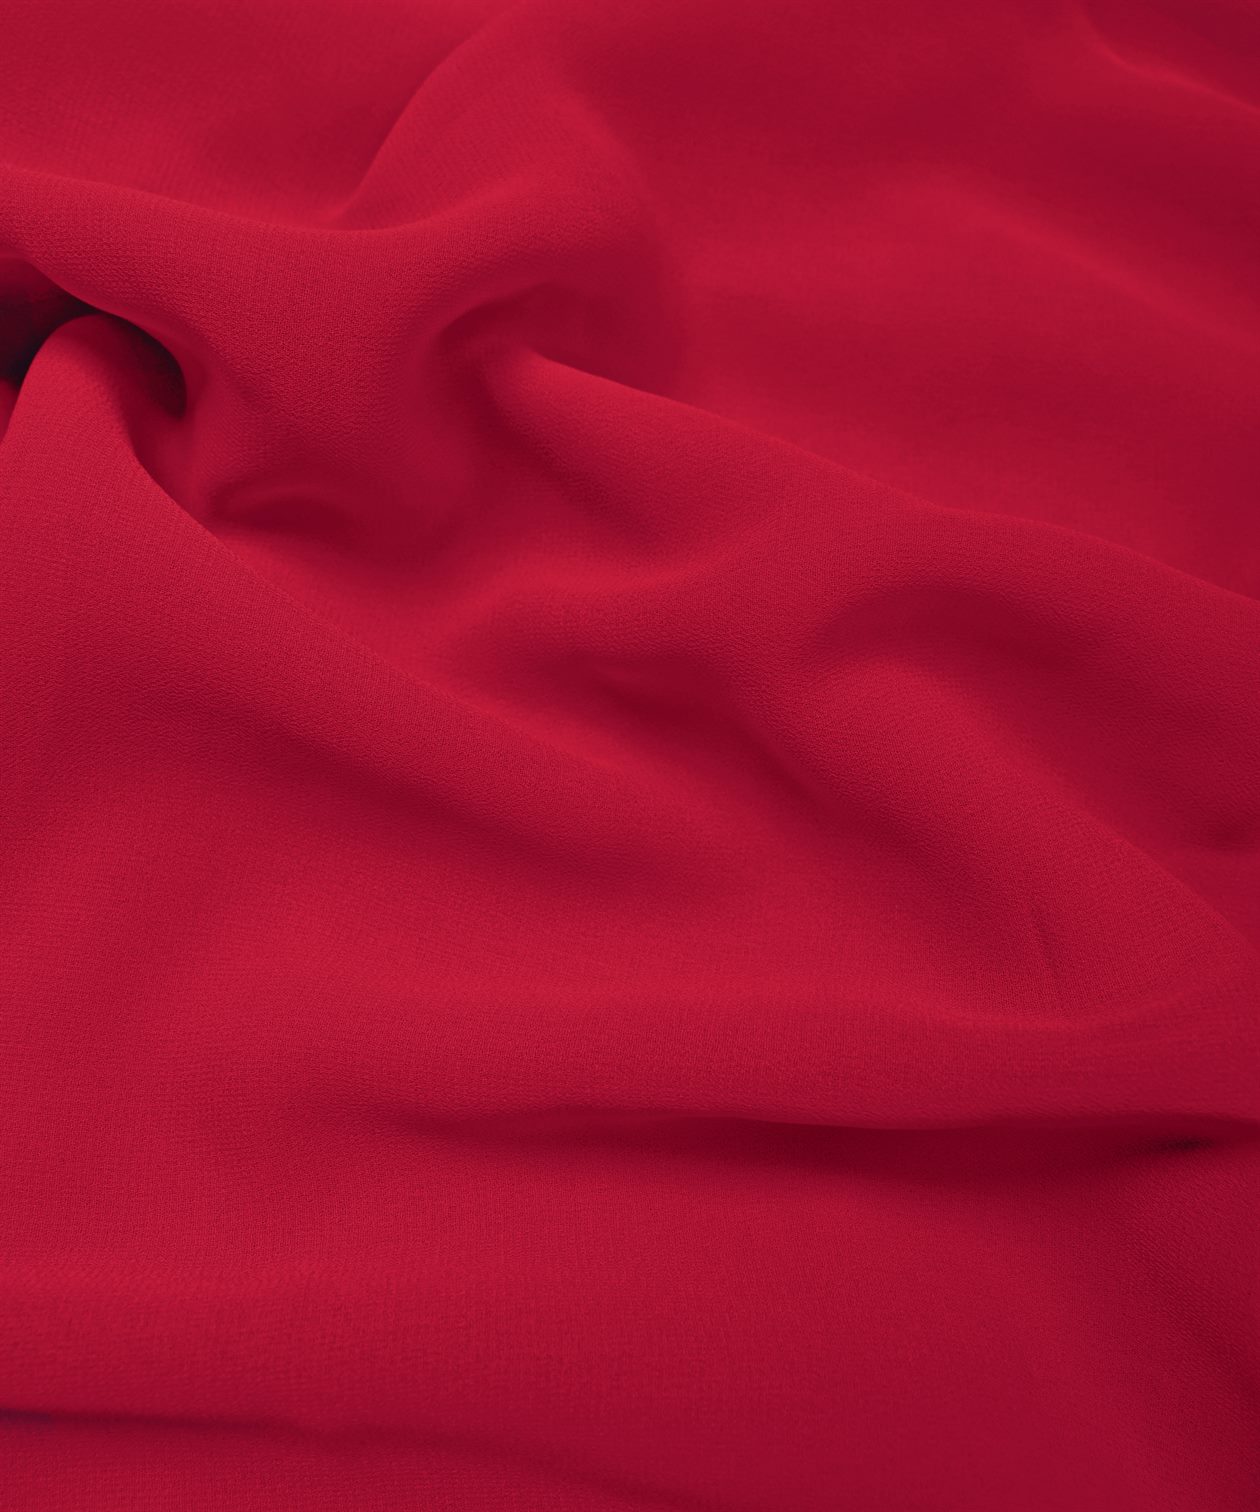 Cationic Dark Ruby Plain Dyed Georgette (60 Grams) Fabric